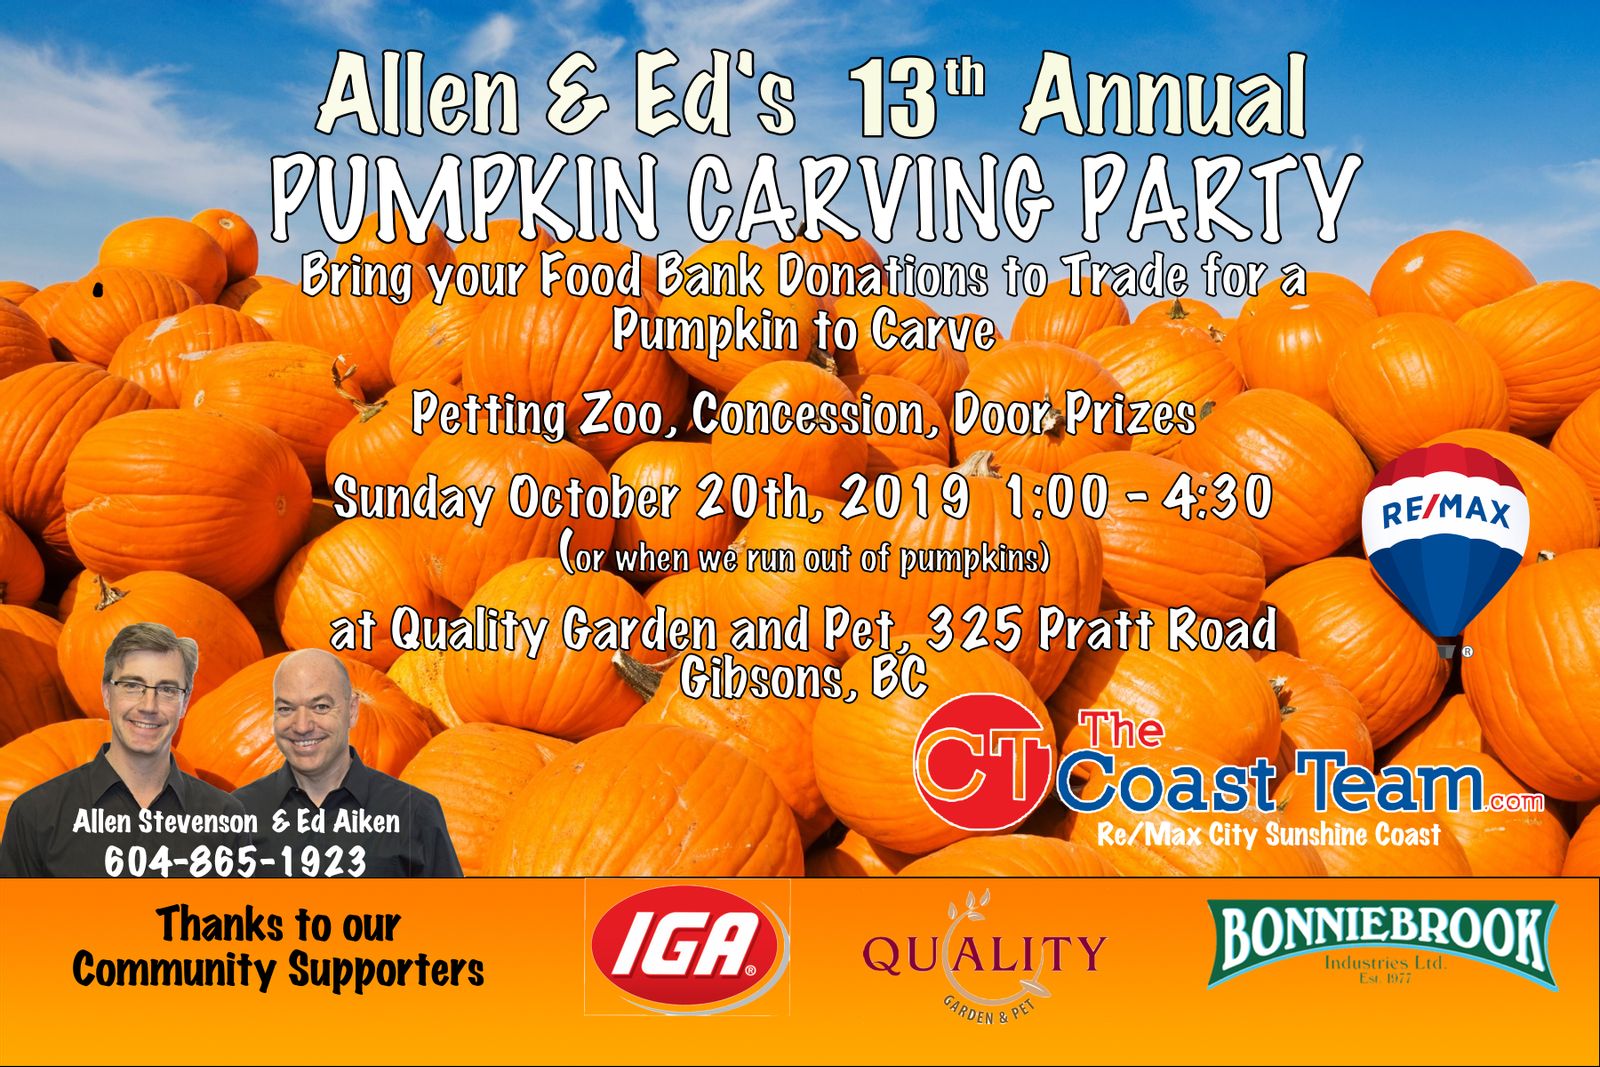 Pumpkin Carving Party - Sunday October 20th 1 - 4:30pm